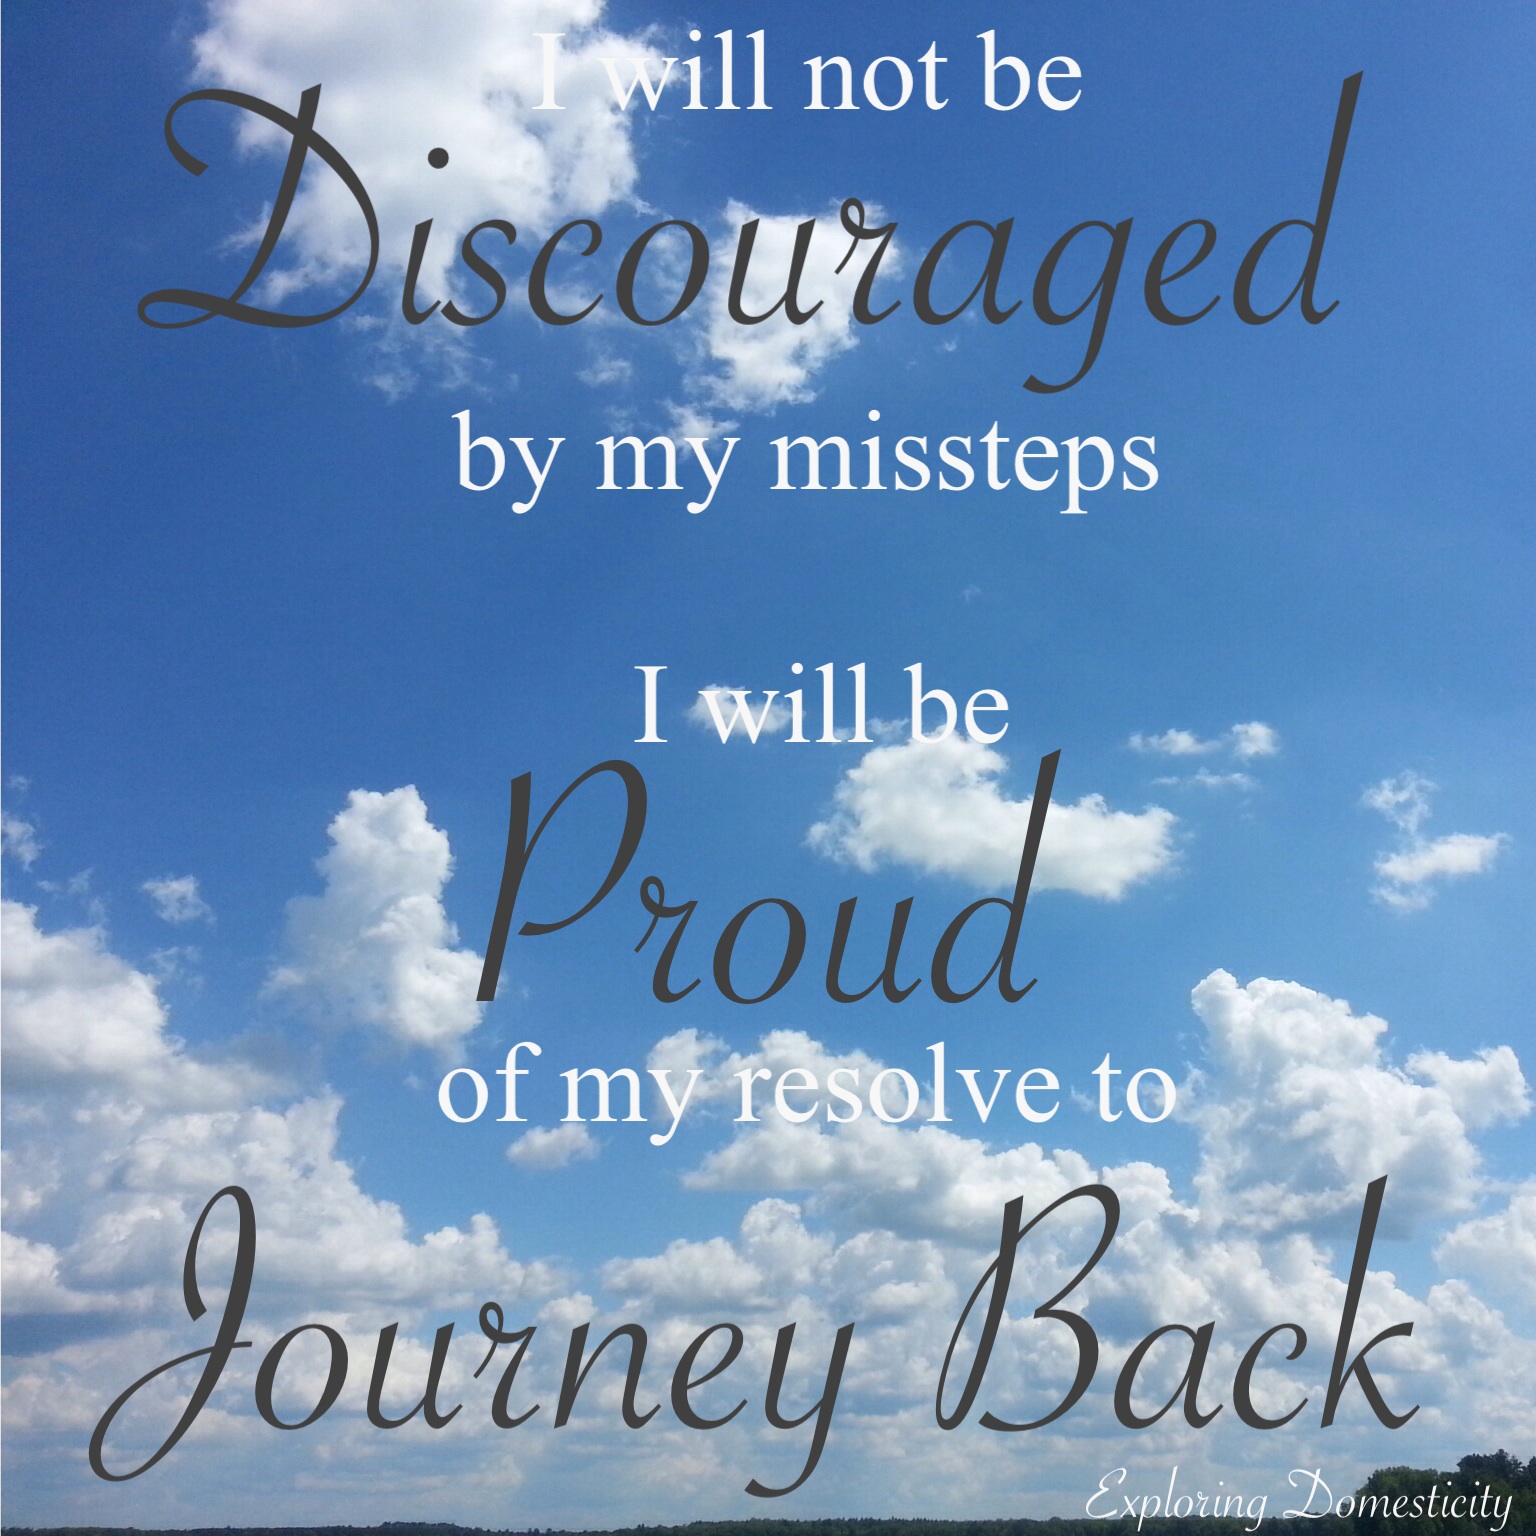 Quotes About Not Being Discouraged. QuotesGram